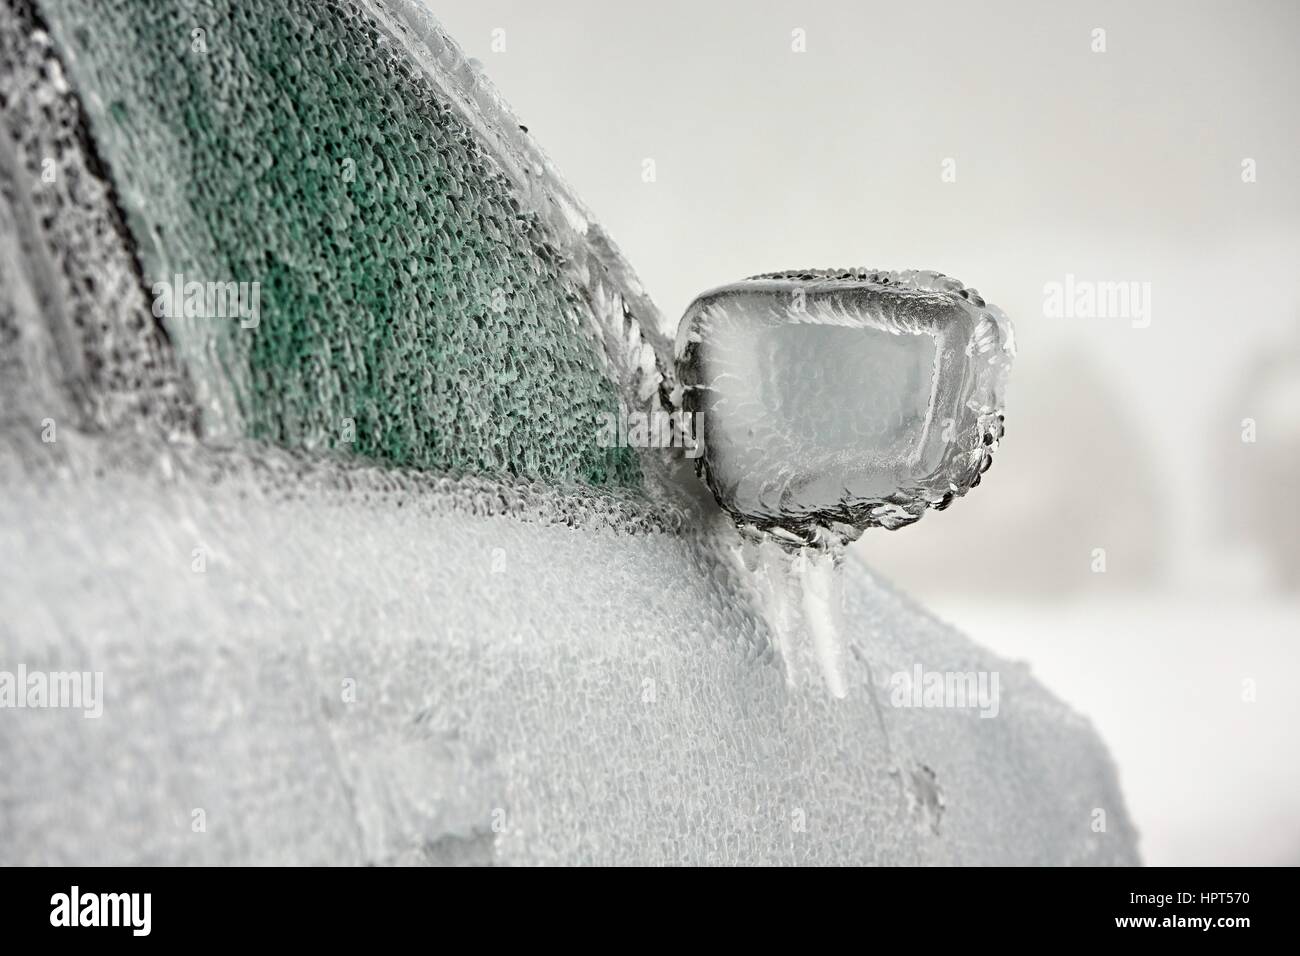 Car on the street covered by icy rain. Stock Photo